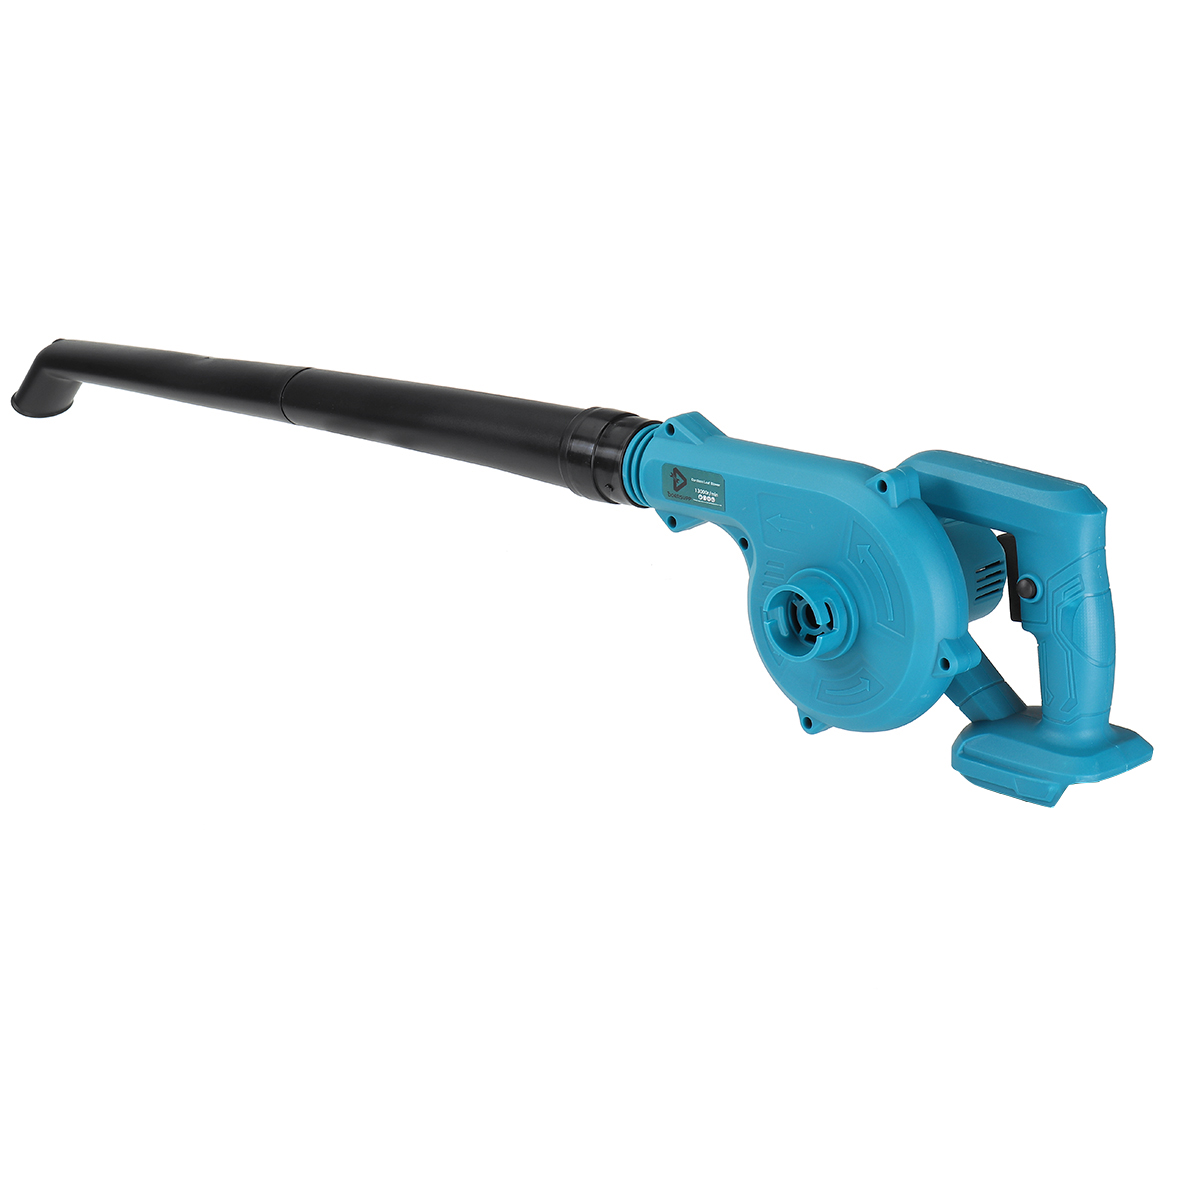 1800W-Electric-Blower-Cordless-Vacuum-Handhled-Cleaning-Tools-Dust-Blowing-Dust-Collector-Power-Tool-1912149-11